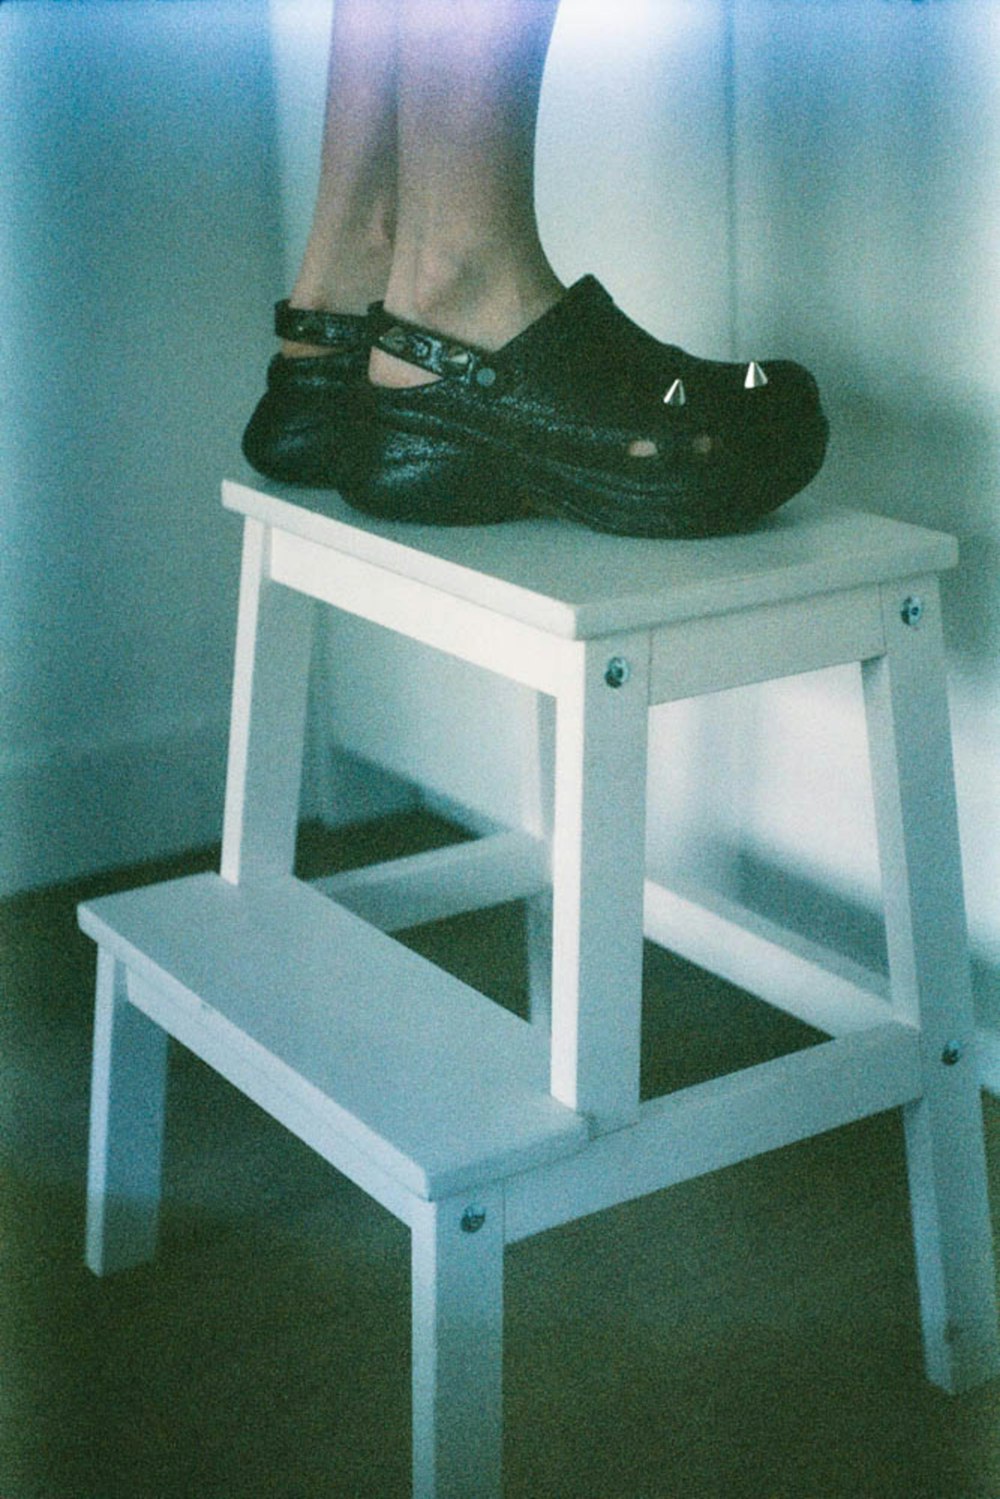 a person's feet on a white table